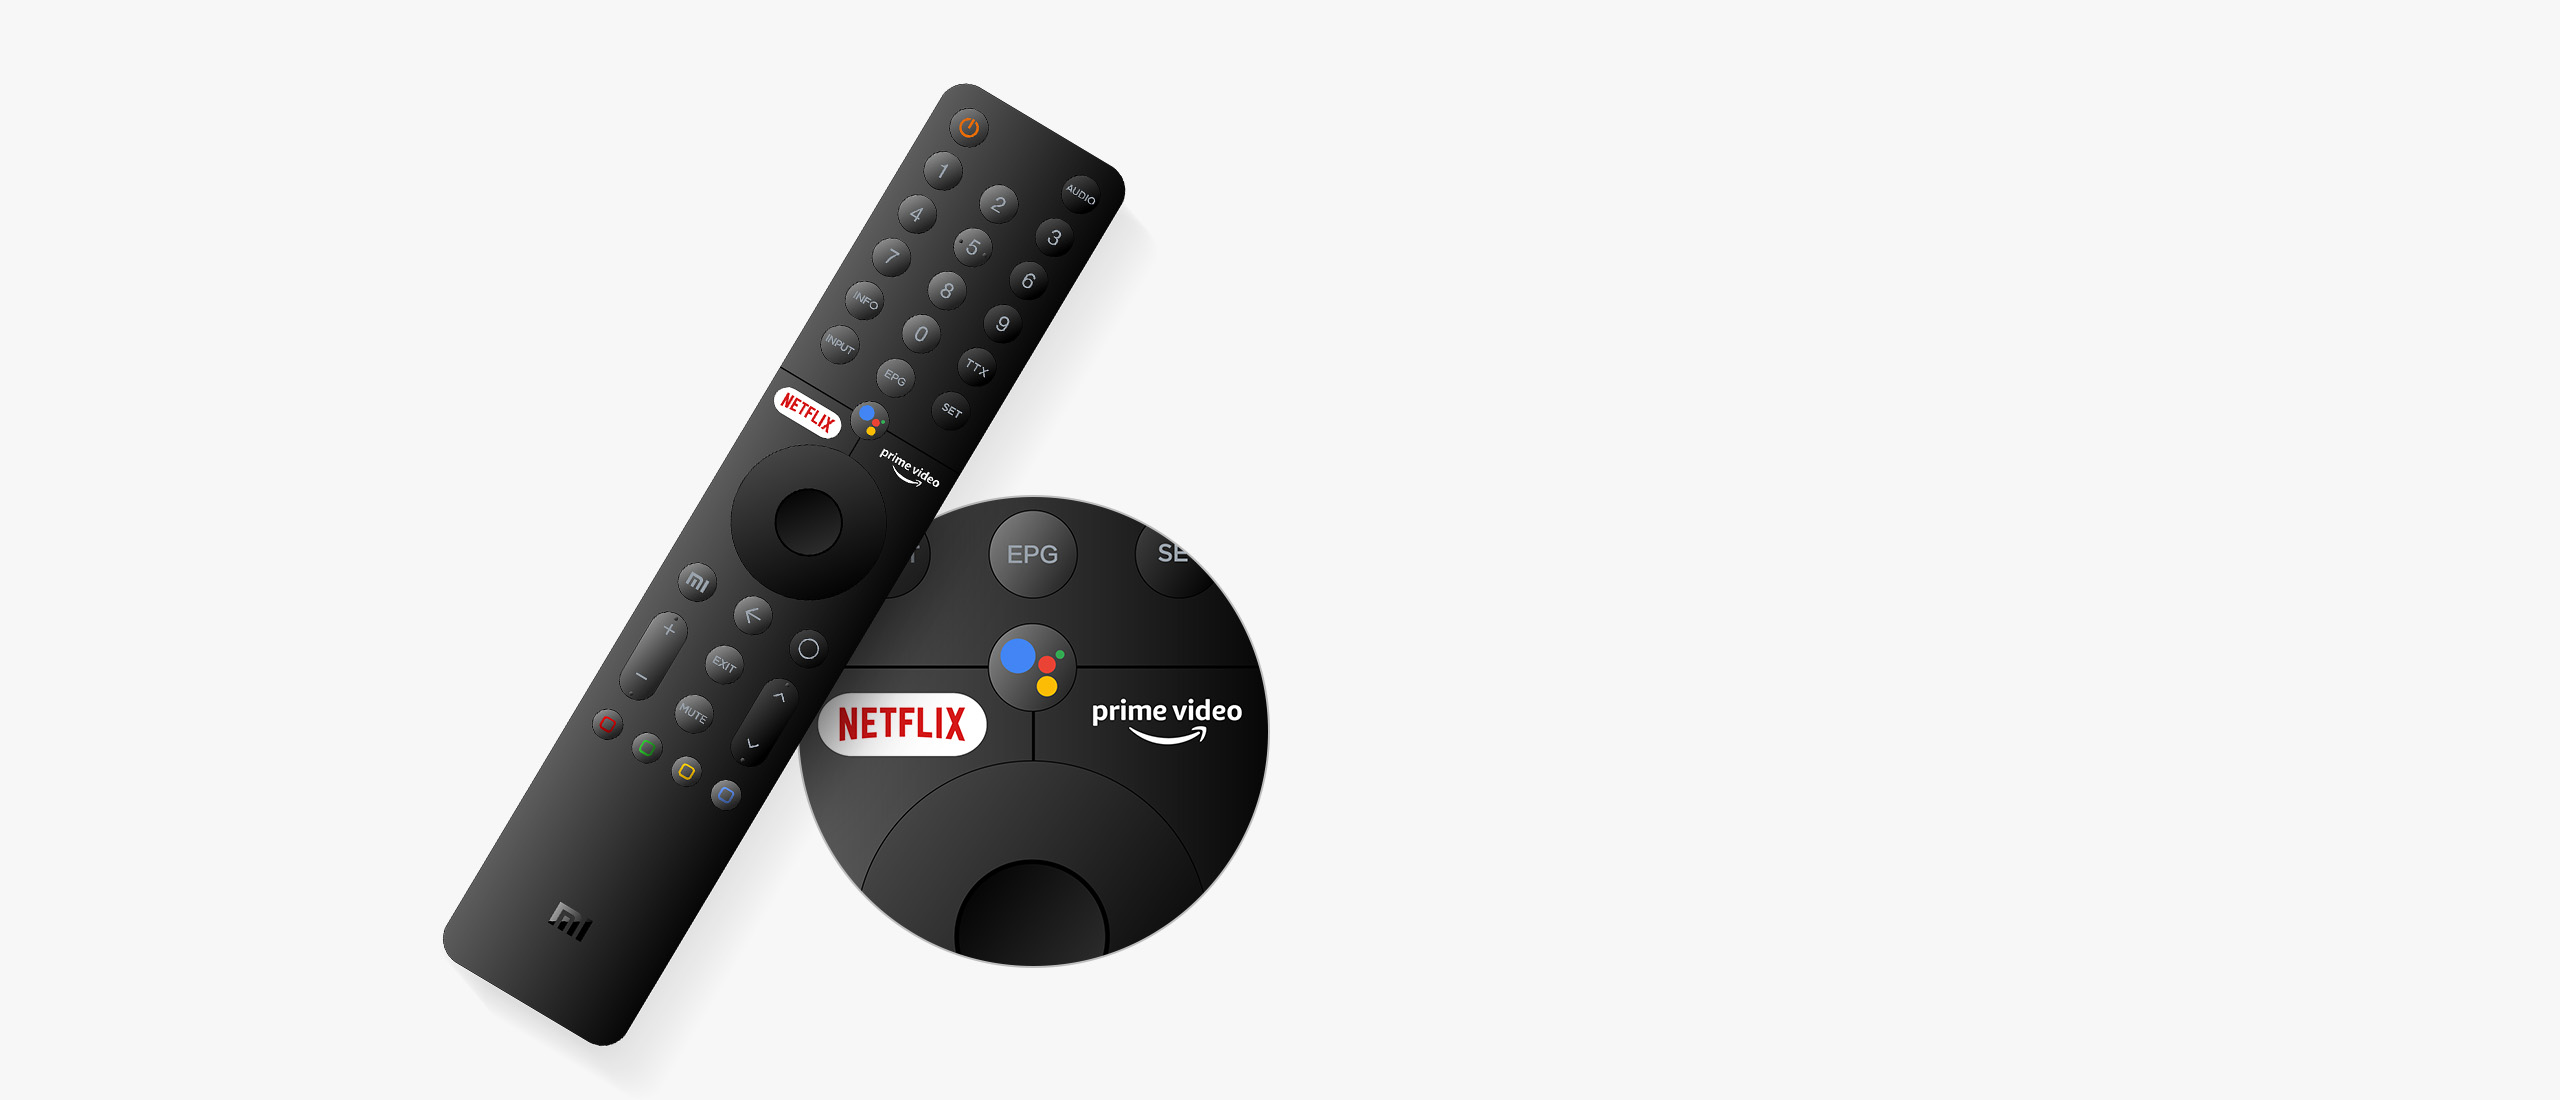 360 degree bluetooth remote control works from any direction